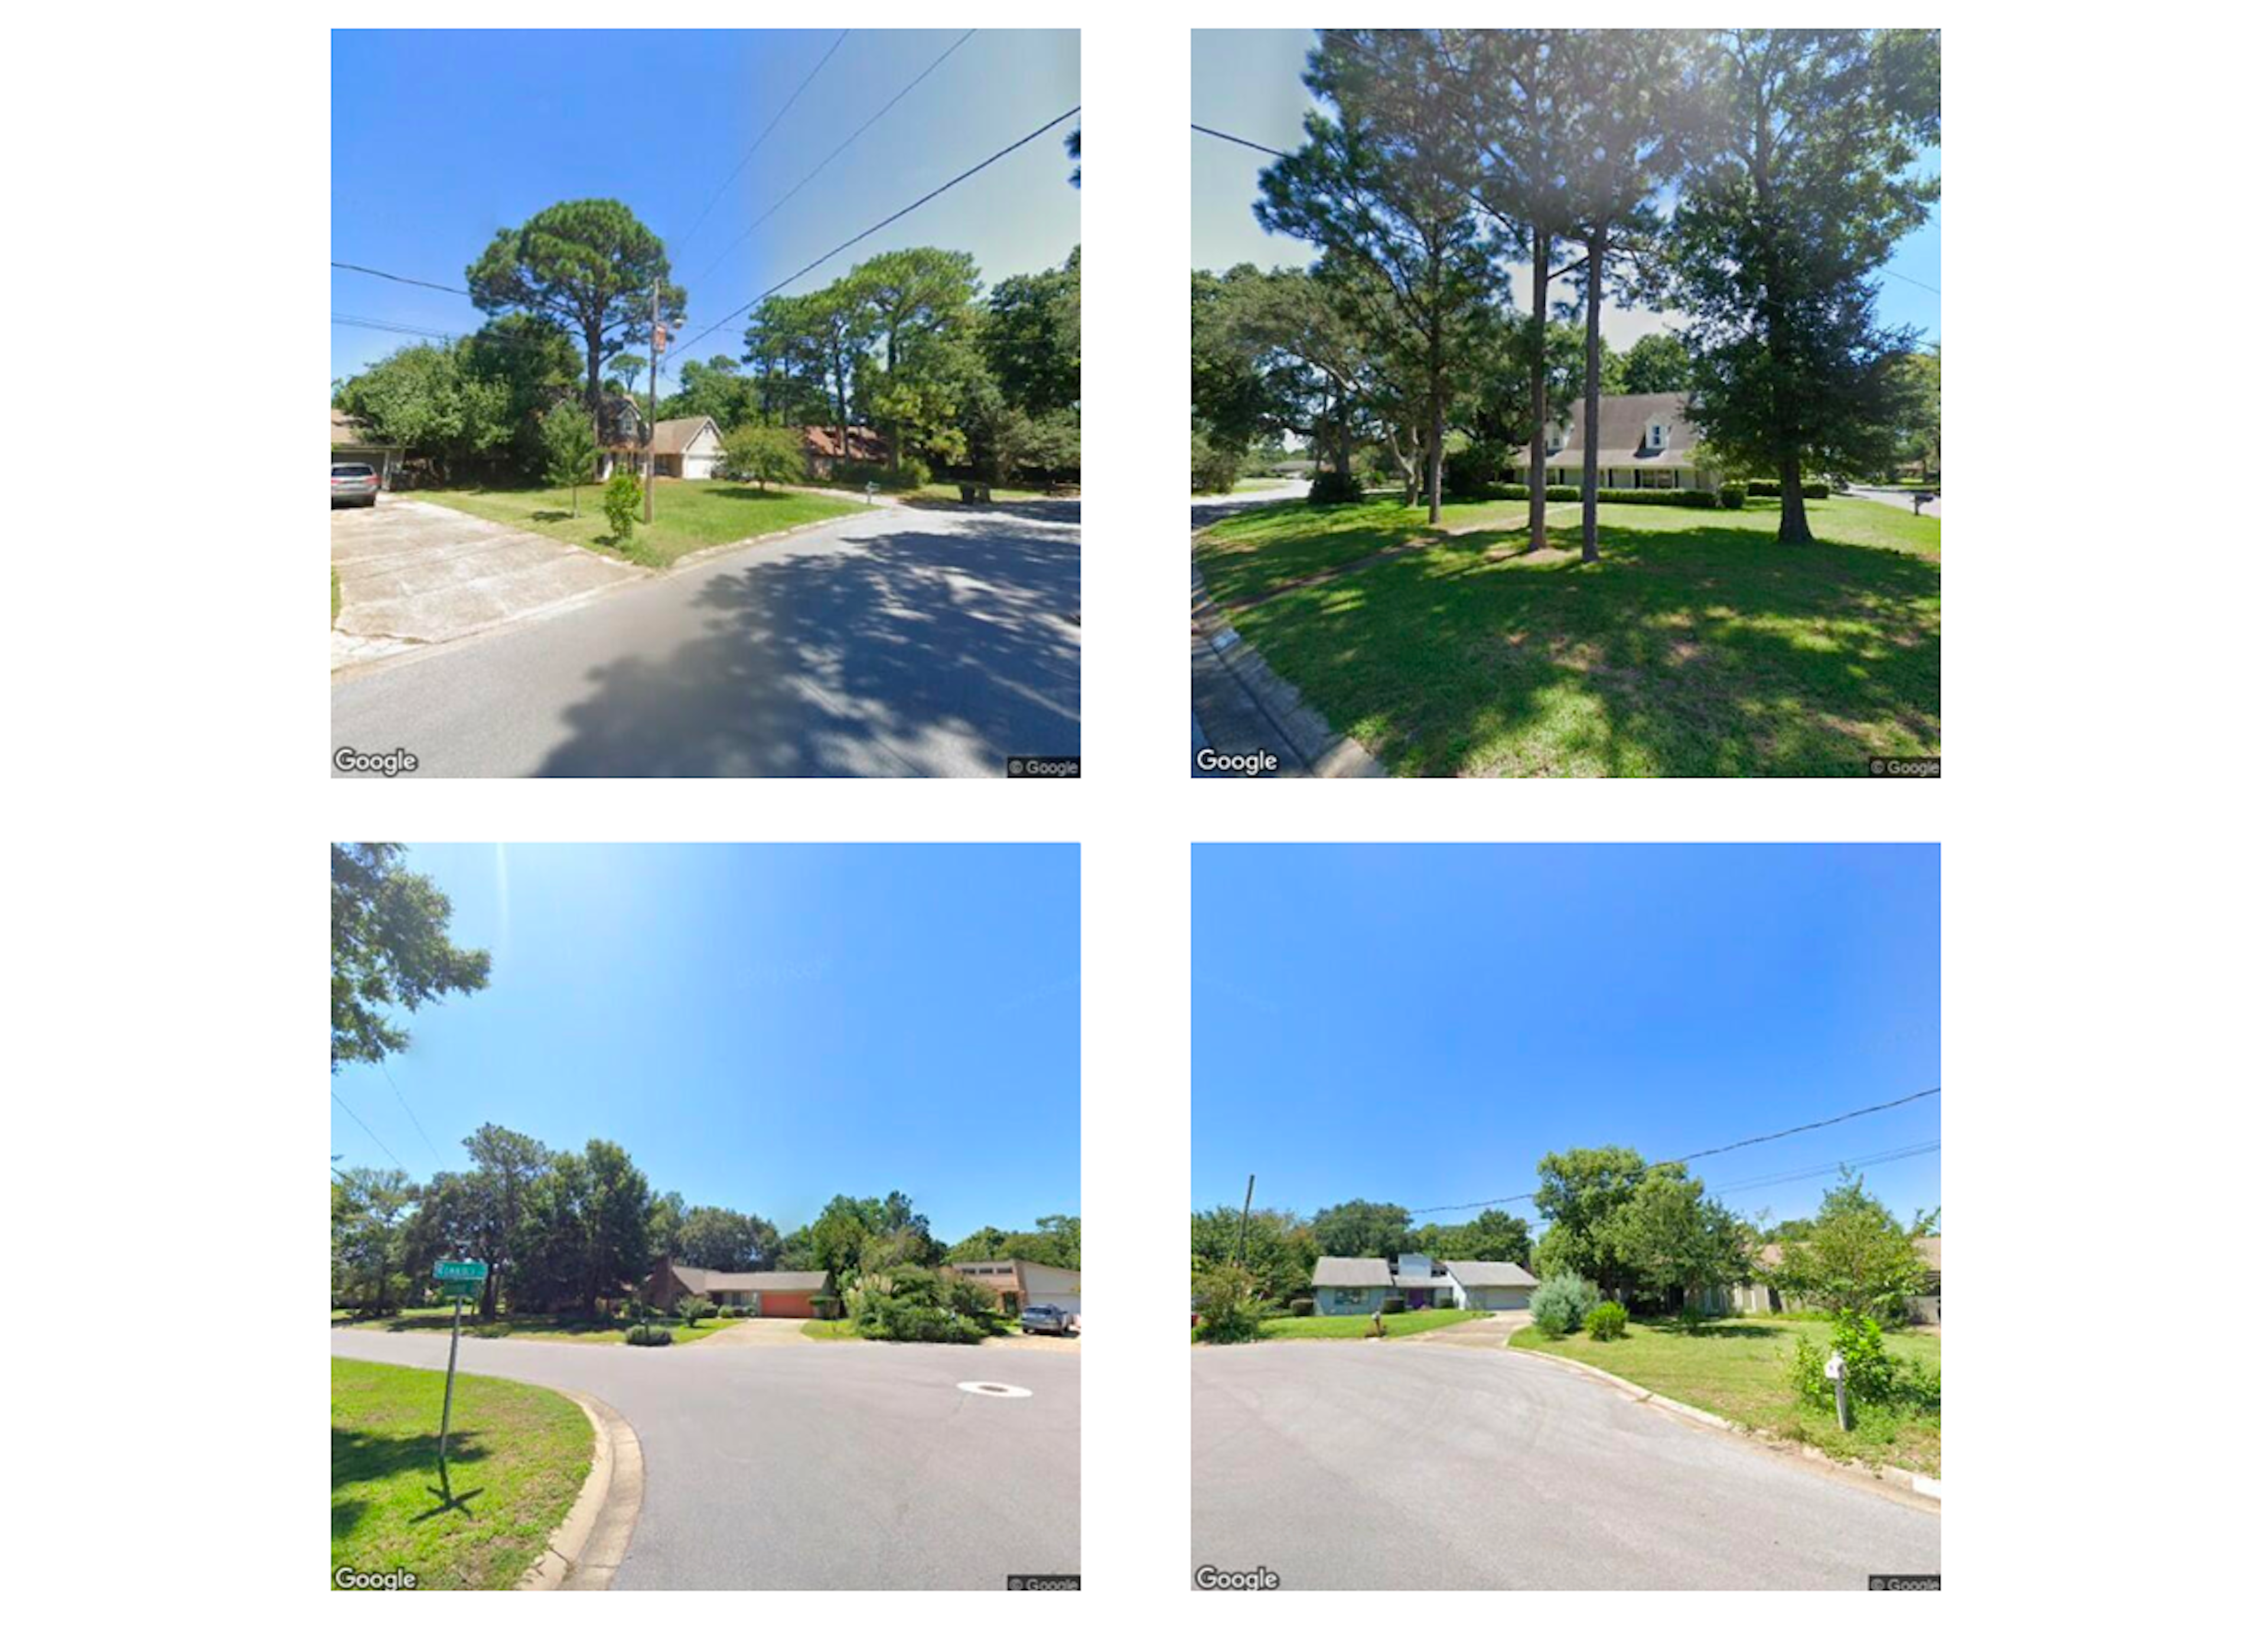 Four images of streetviews